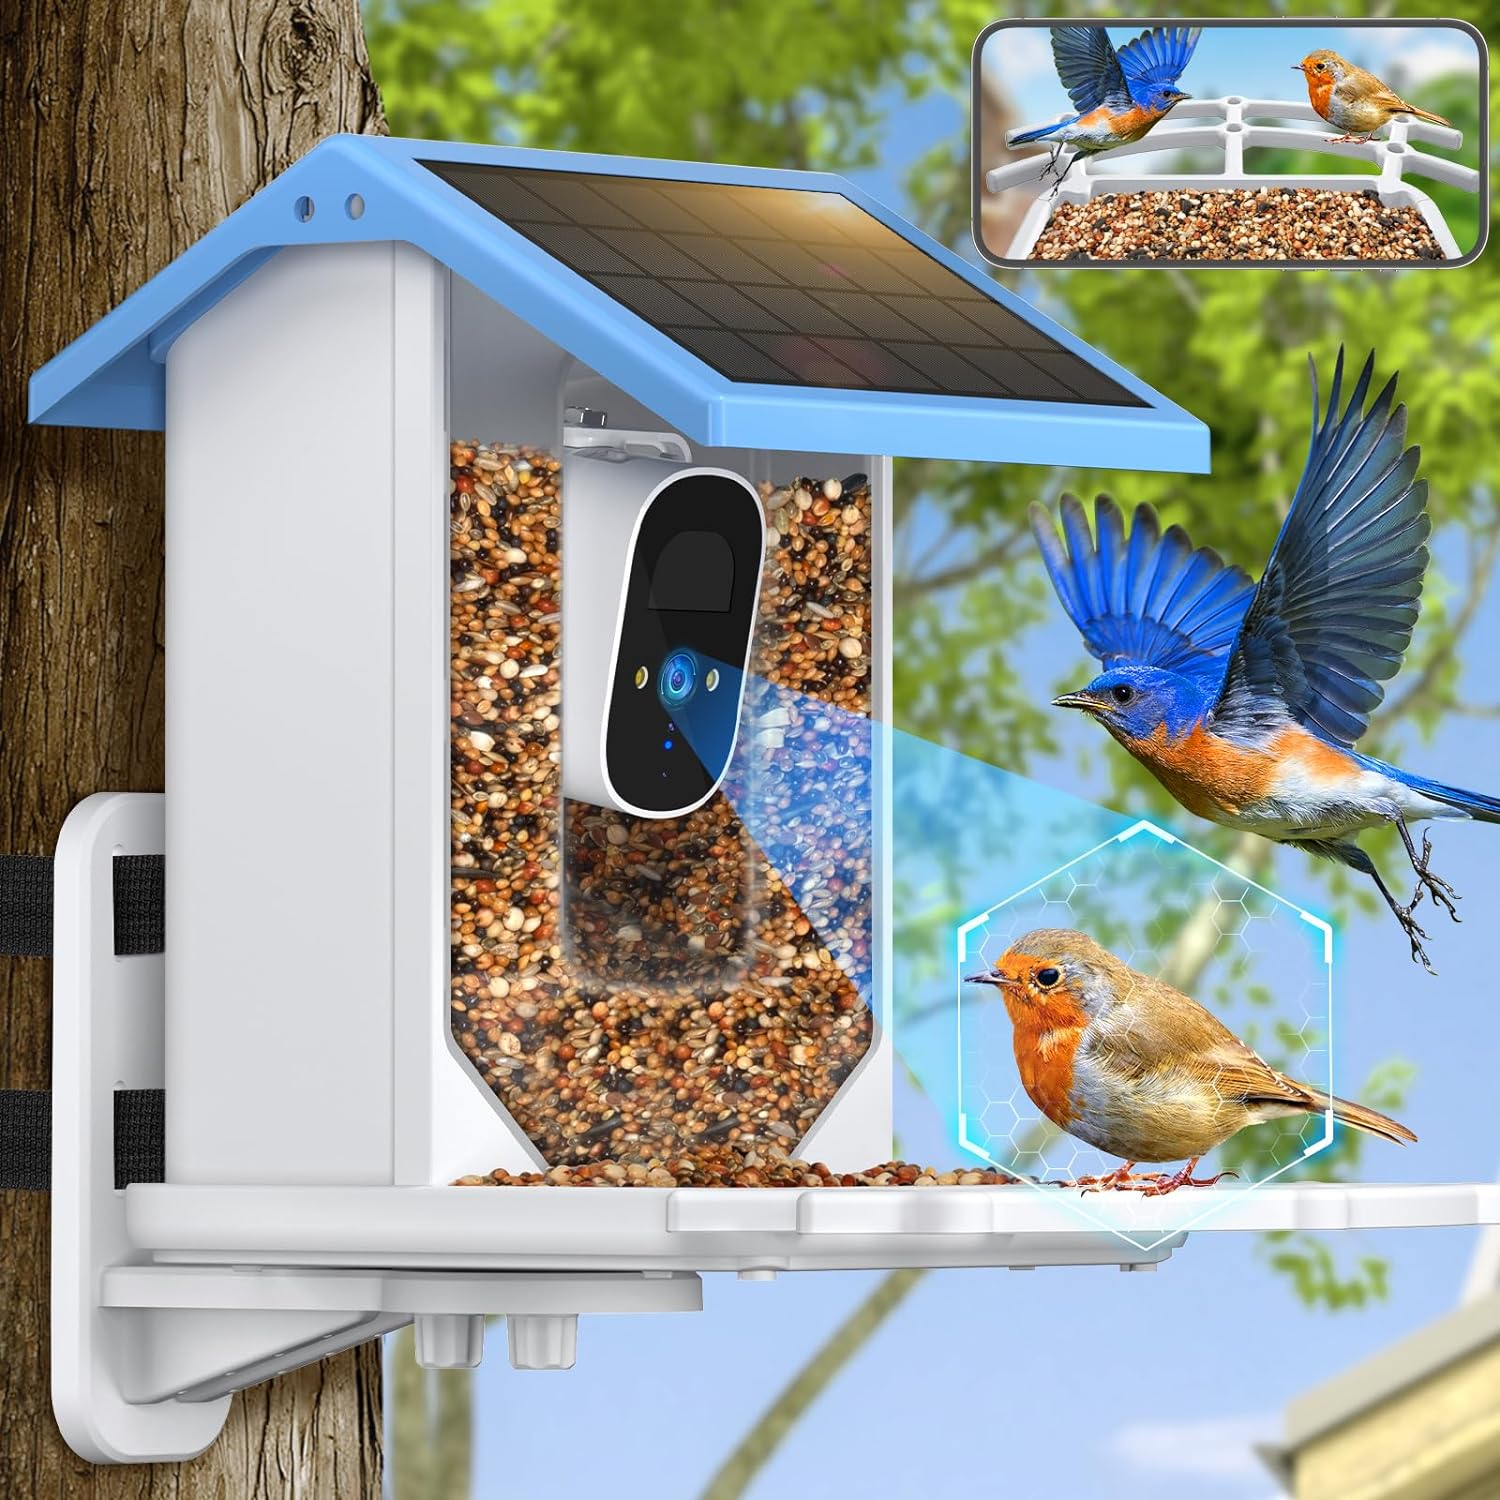 Bird Feeder with Camera Solar Powered, Outdoor Smart Bird Feeder, 4 MP HD Auto Capture Bird Videos, Real Time Views and Notifications, Ideal Gift for Bird Lovers